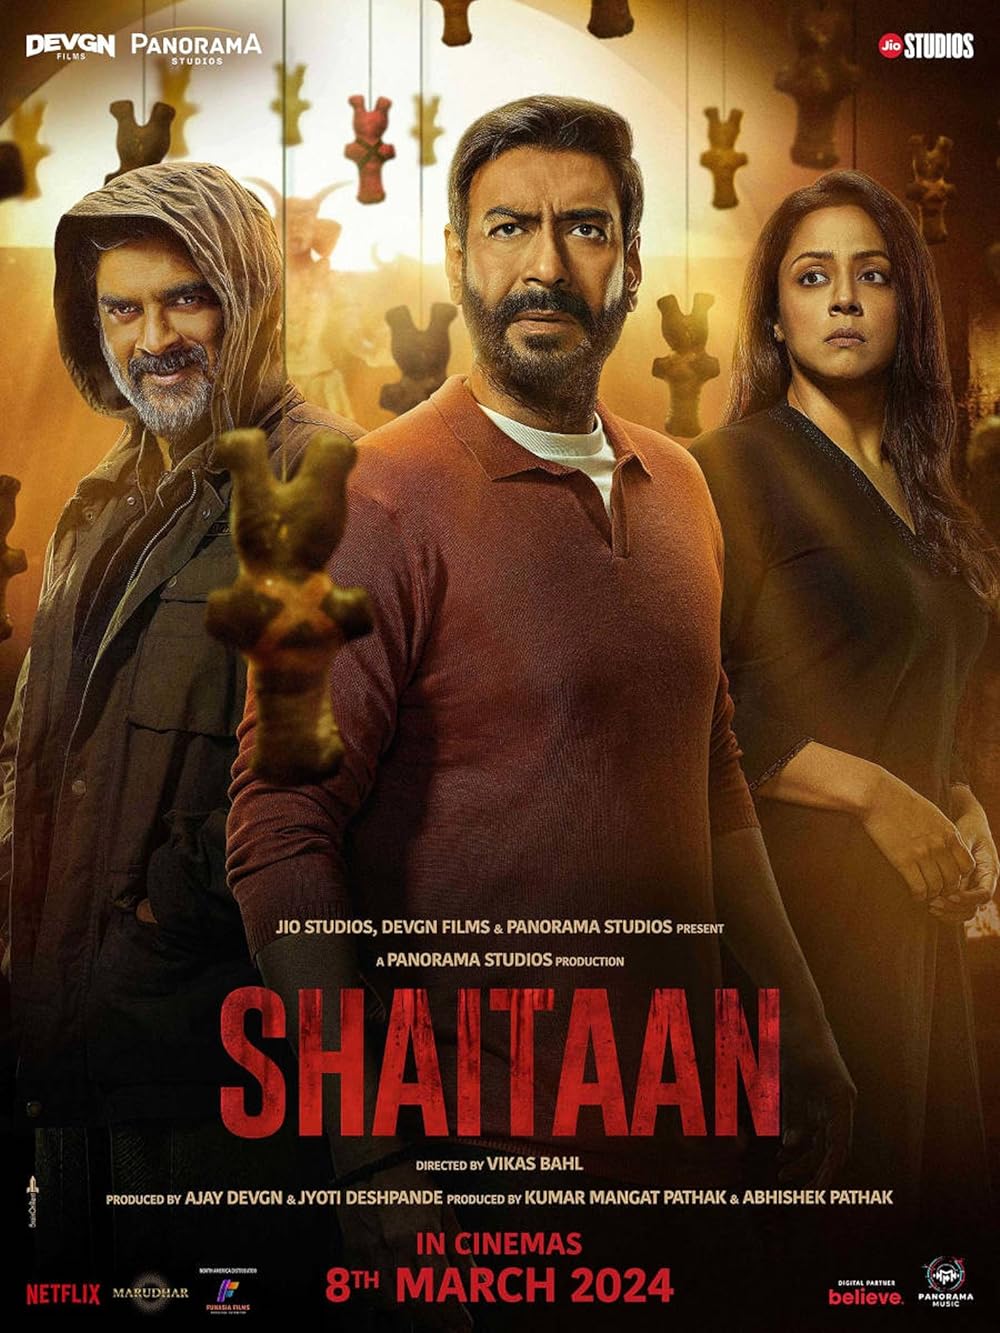 Shaitaan (Streaming on Netflix) - May 3Directed by Vikas Bahl and featuring Ajay Devgn and R. Madhavan, 